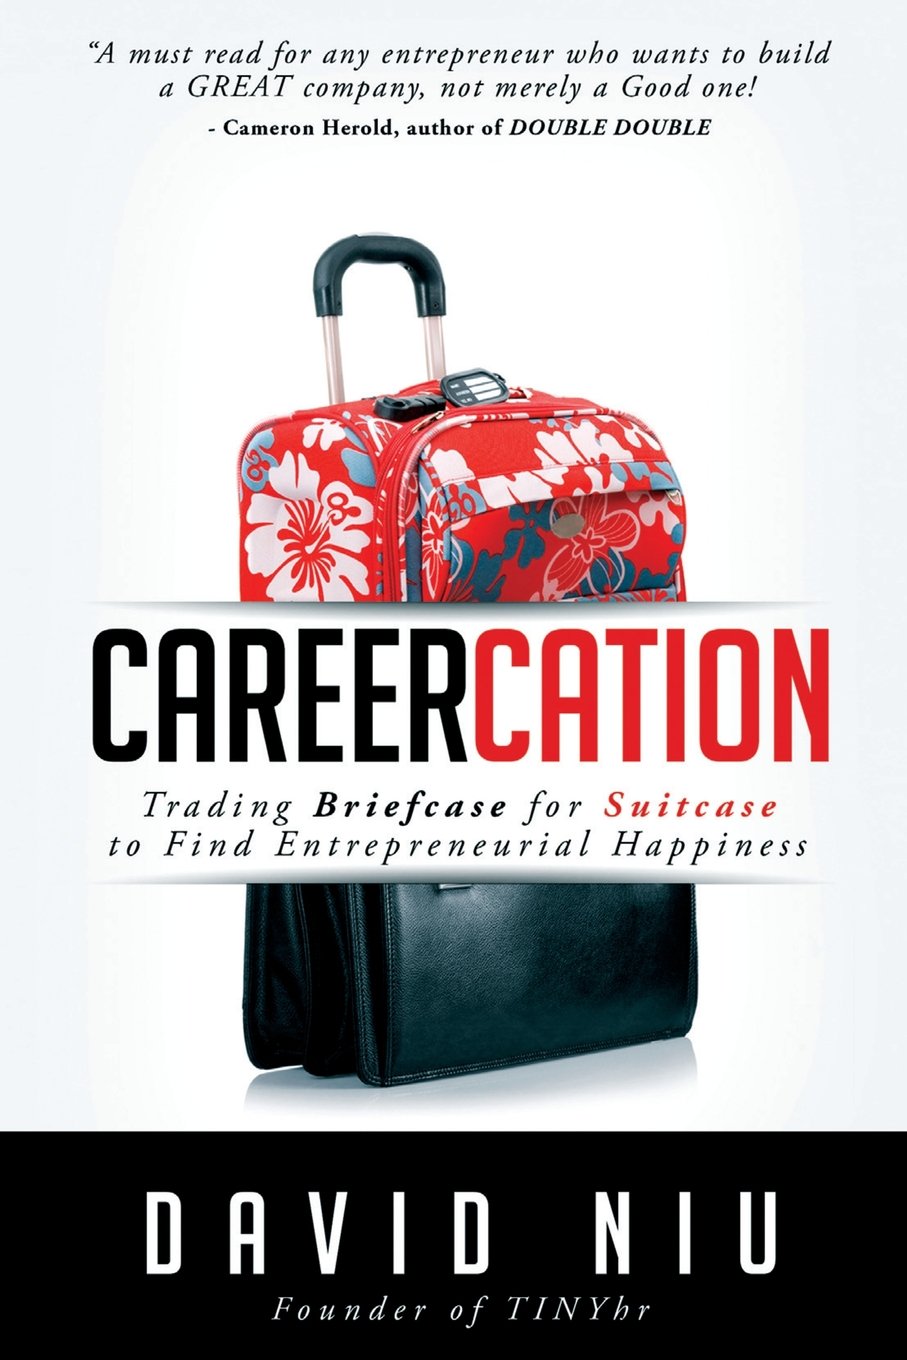 Careercation: Trading Briefcase For Suitcase To Find Entrepreneurial Happiness